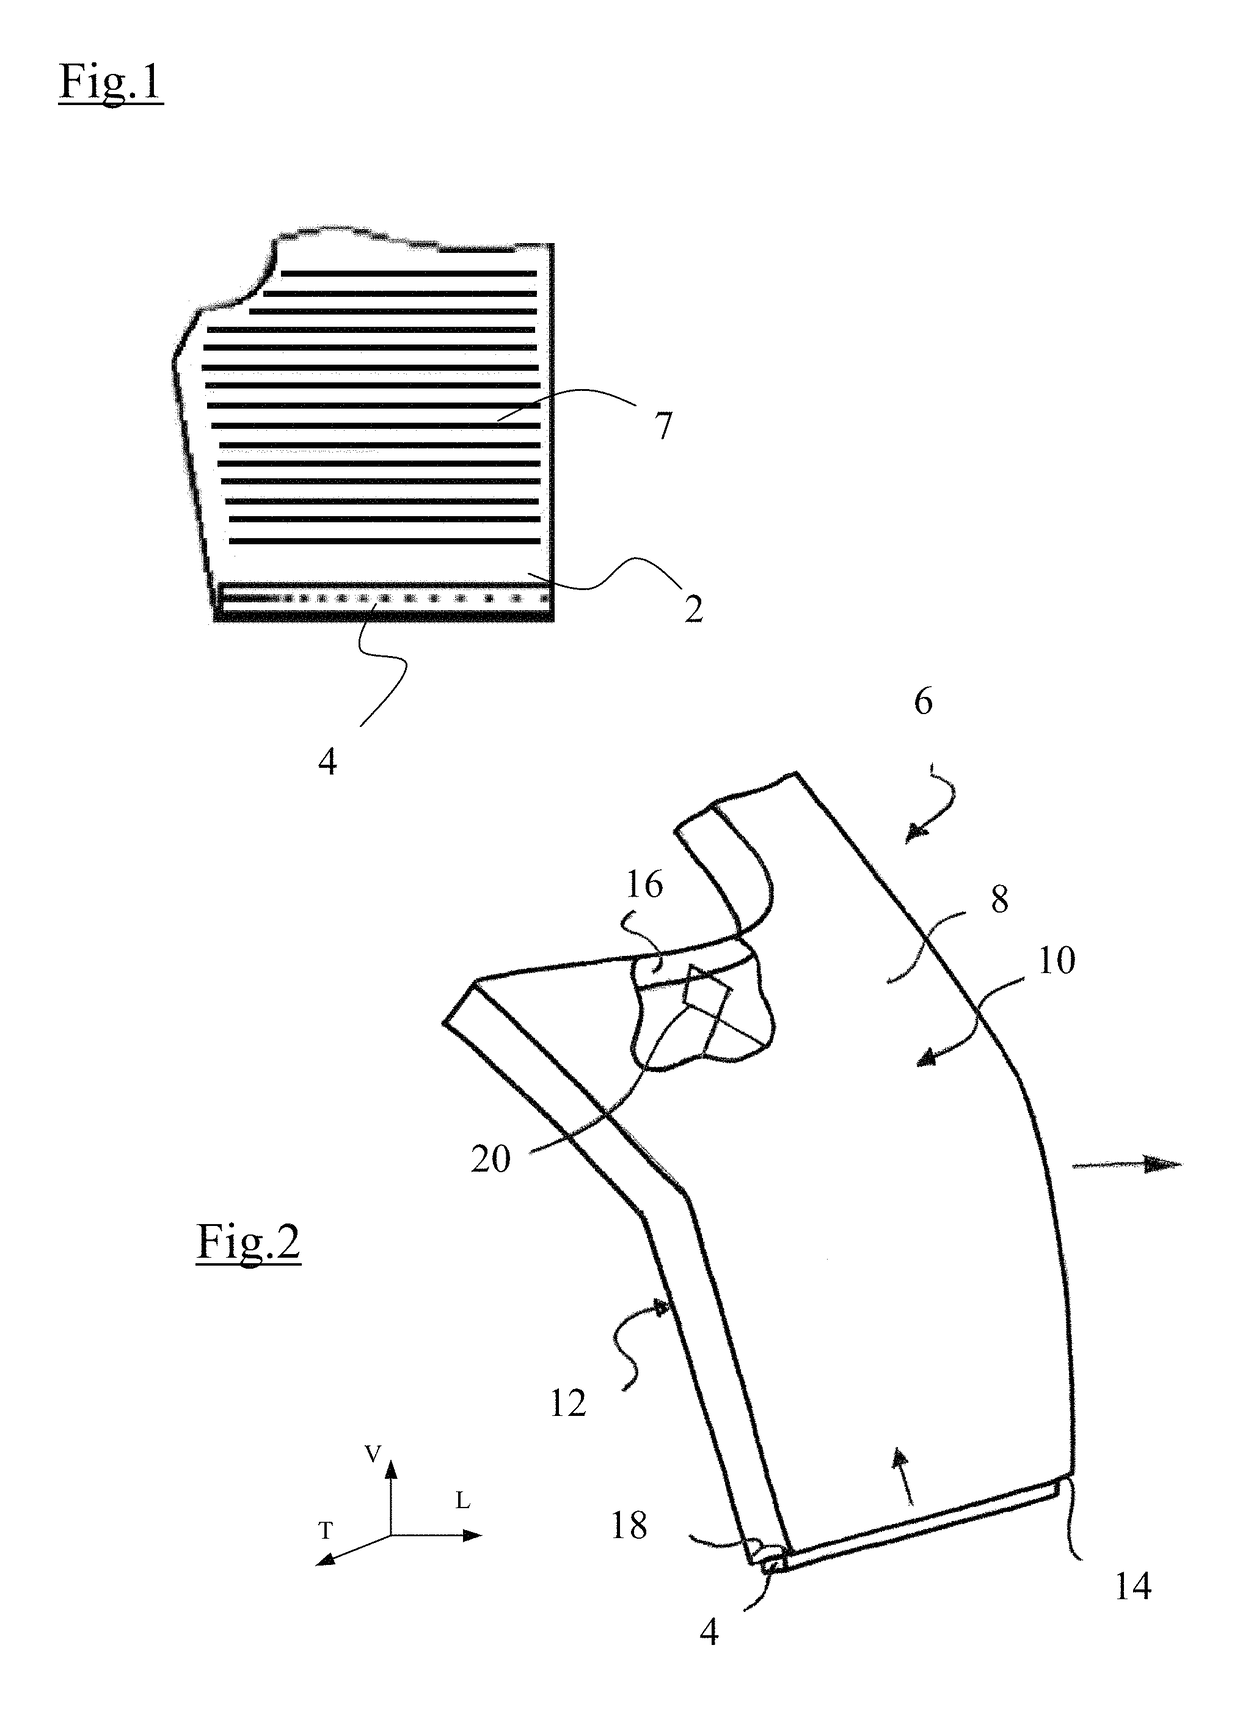 Optical waveguide with a reflective pattern for propagating a light beam